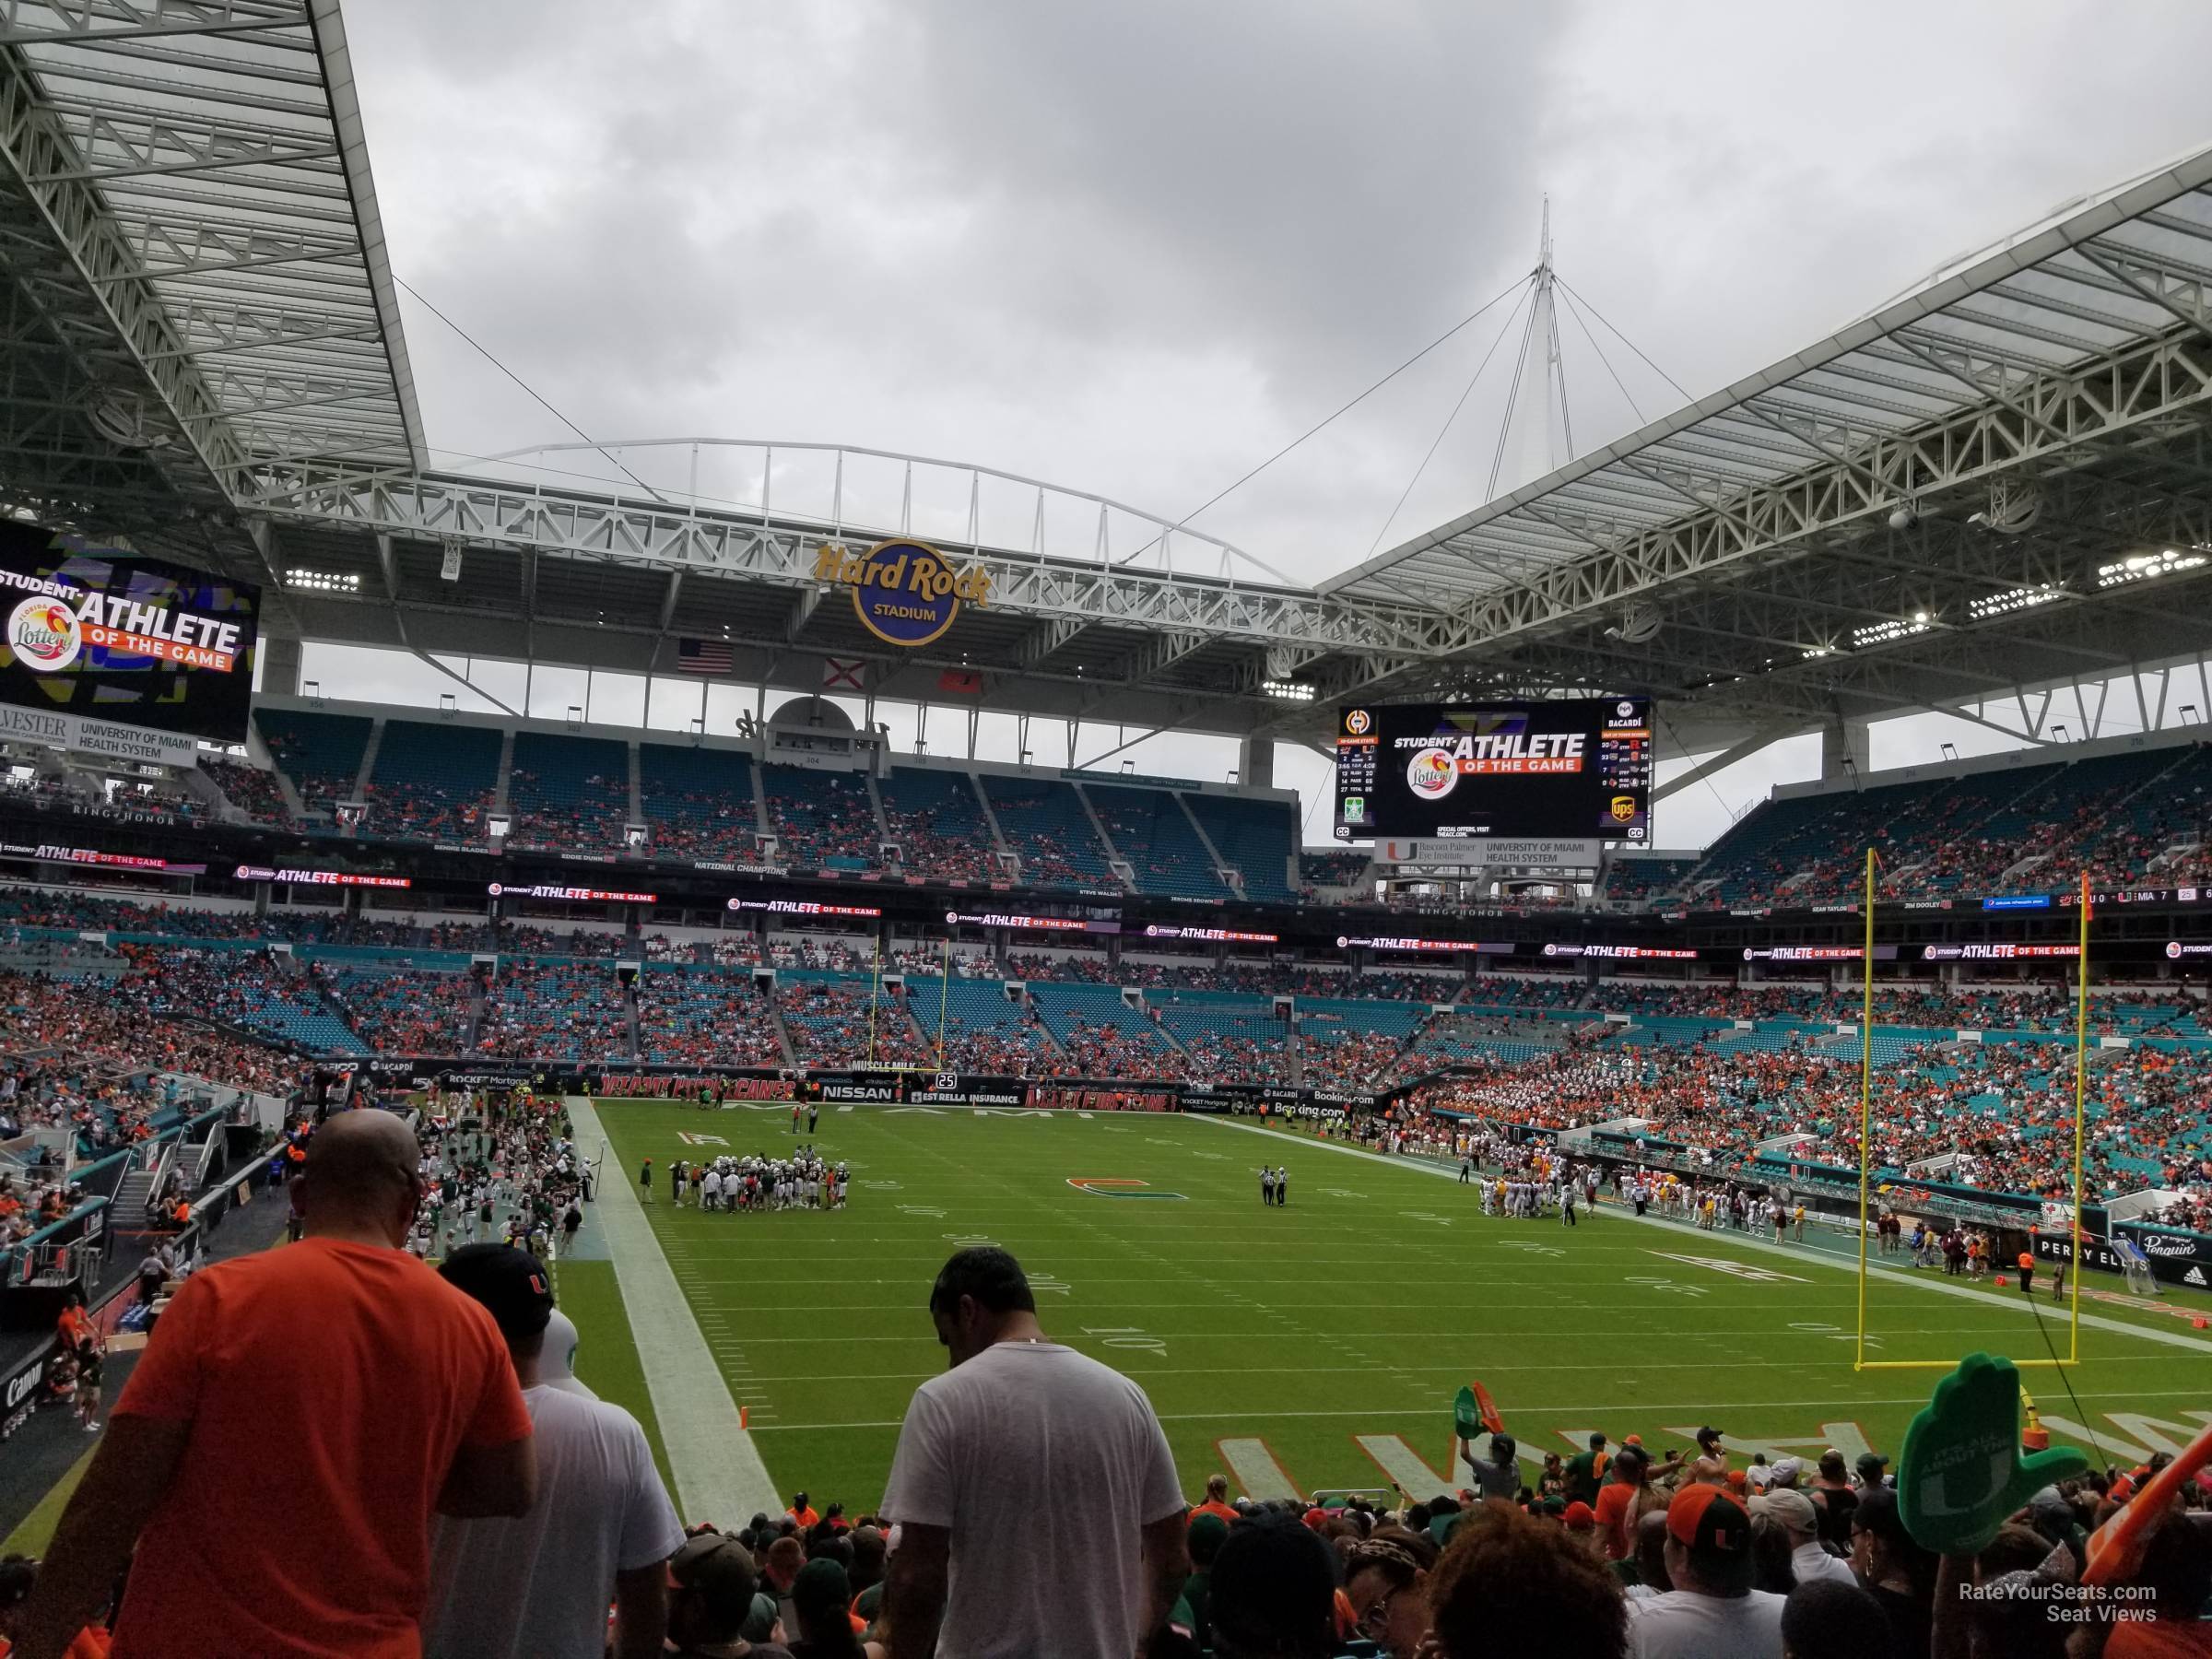 section 134, row 28 seat view  for football - hard rock stadium